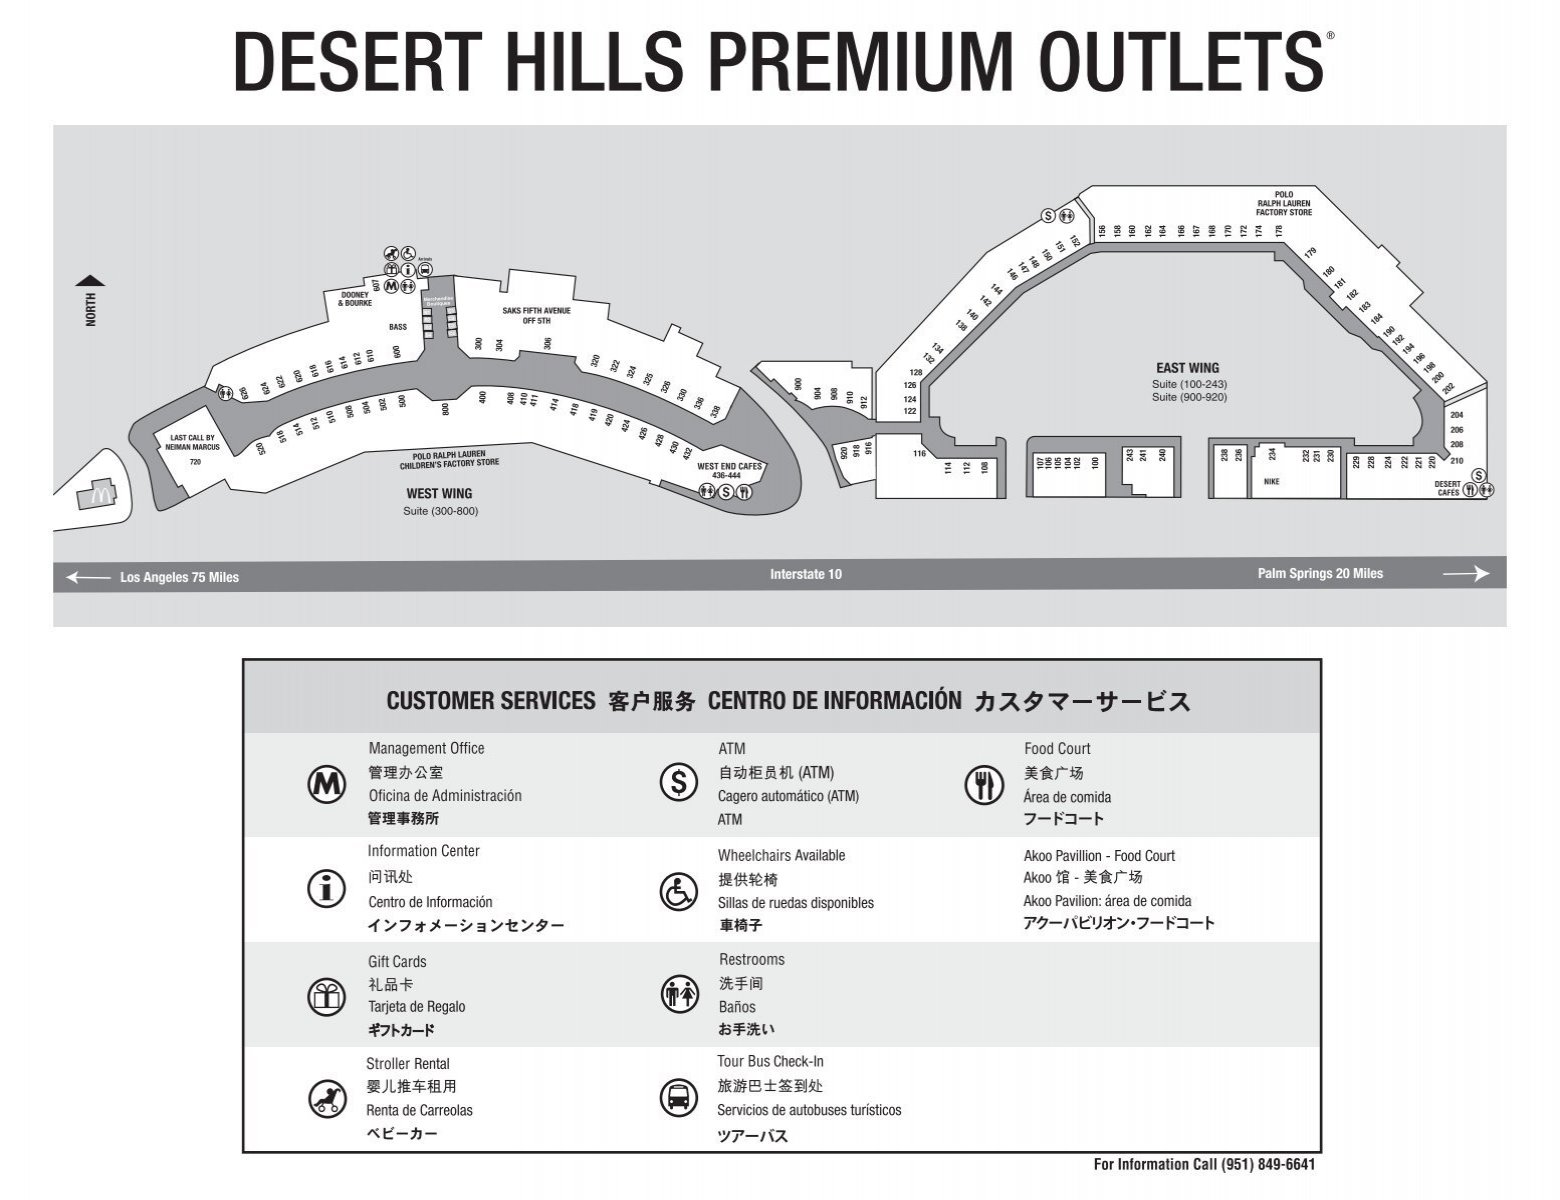 of 2 - Premium Outlets